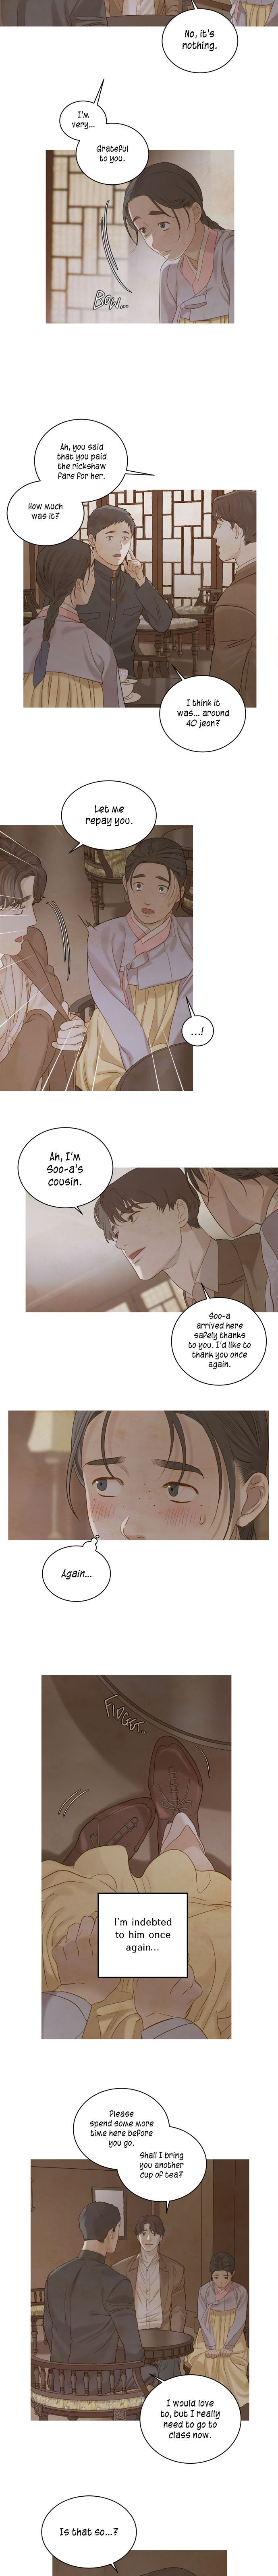 The Whale Star - The Gyeongseong Mermaid - Chapter 29 Page 6